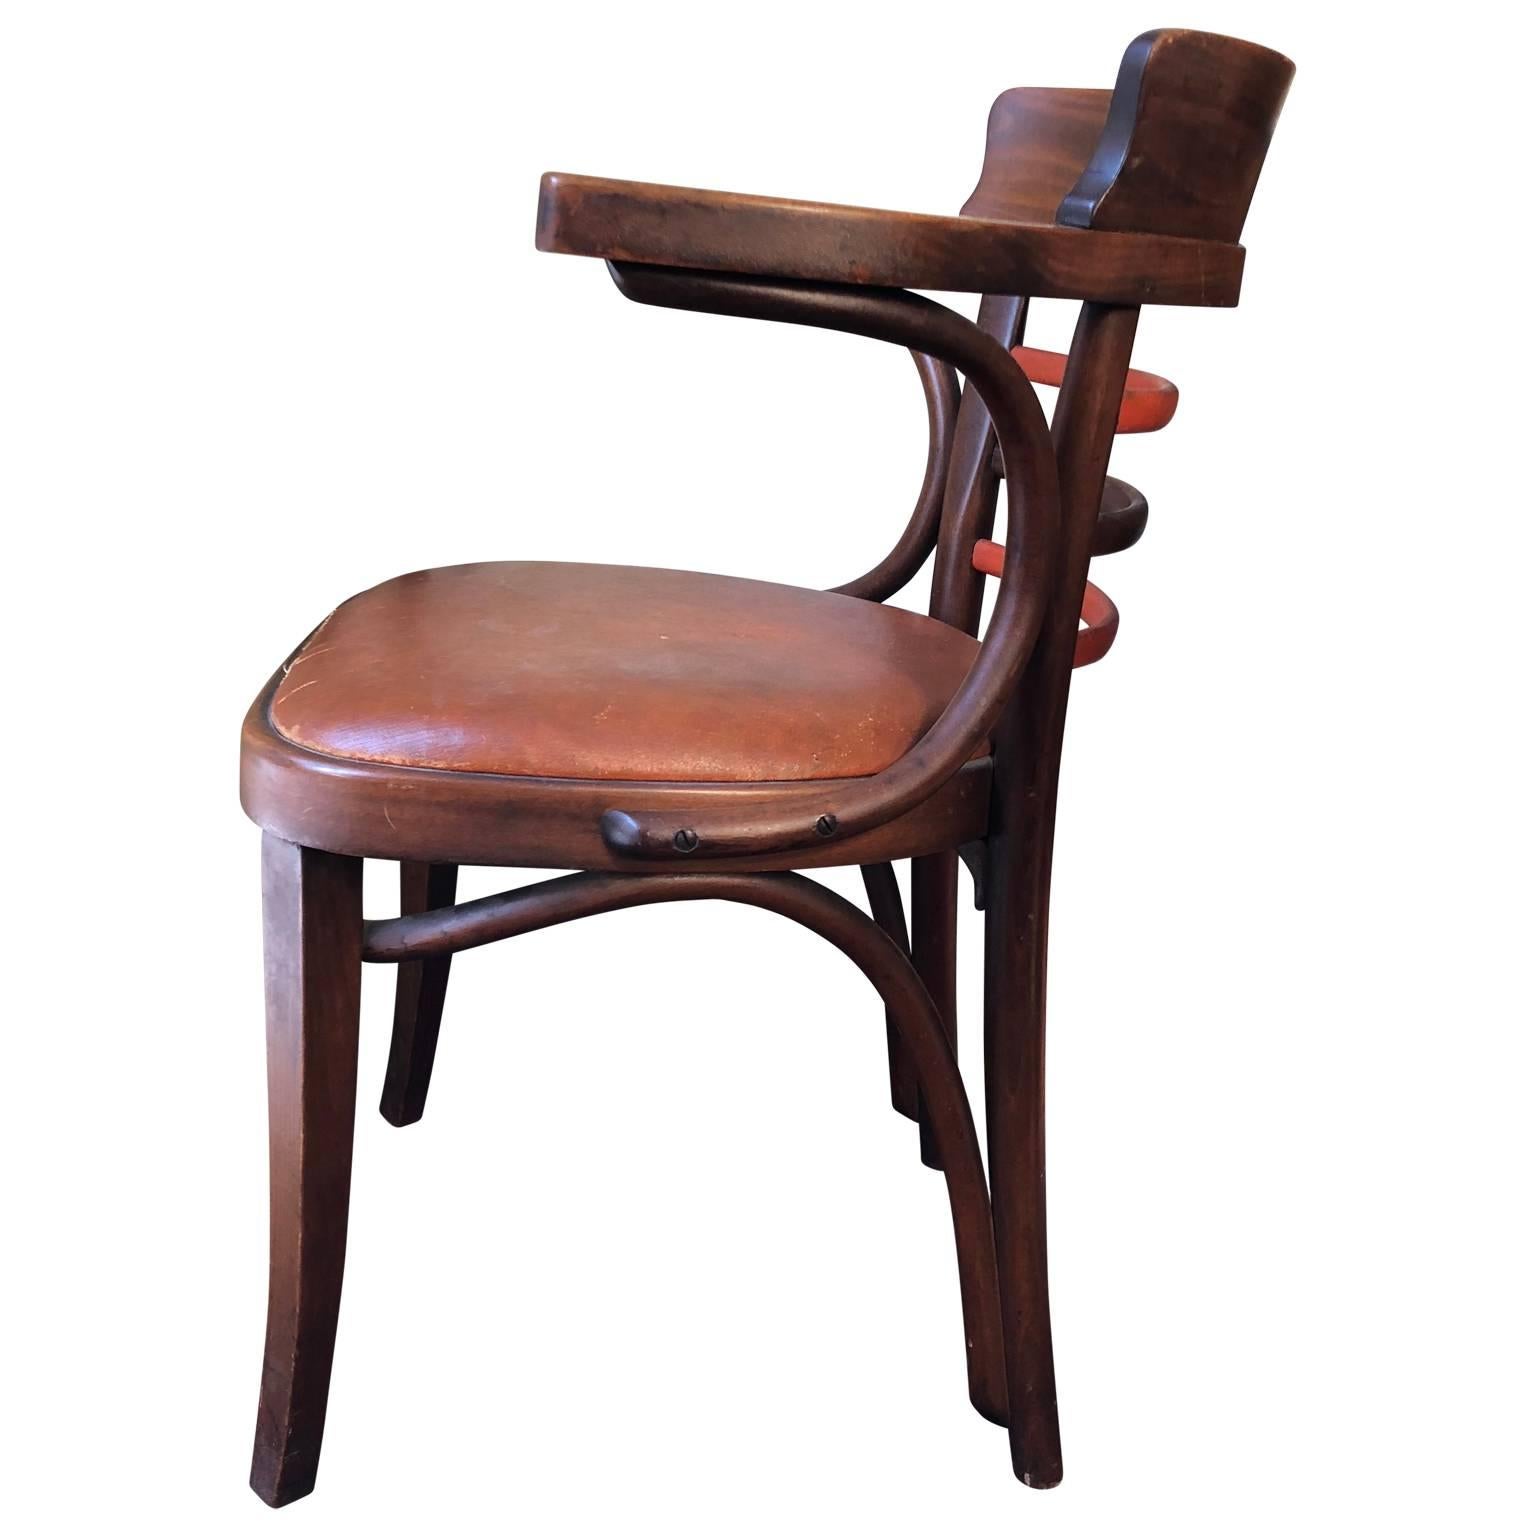 Vienna Secession Early Thonet Style Bentwood Desk Chair by Jacob & Josef Kohn Mundus